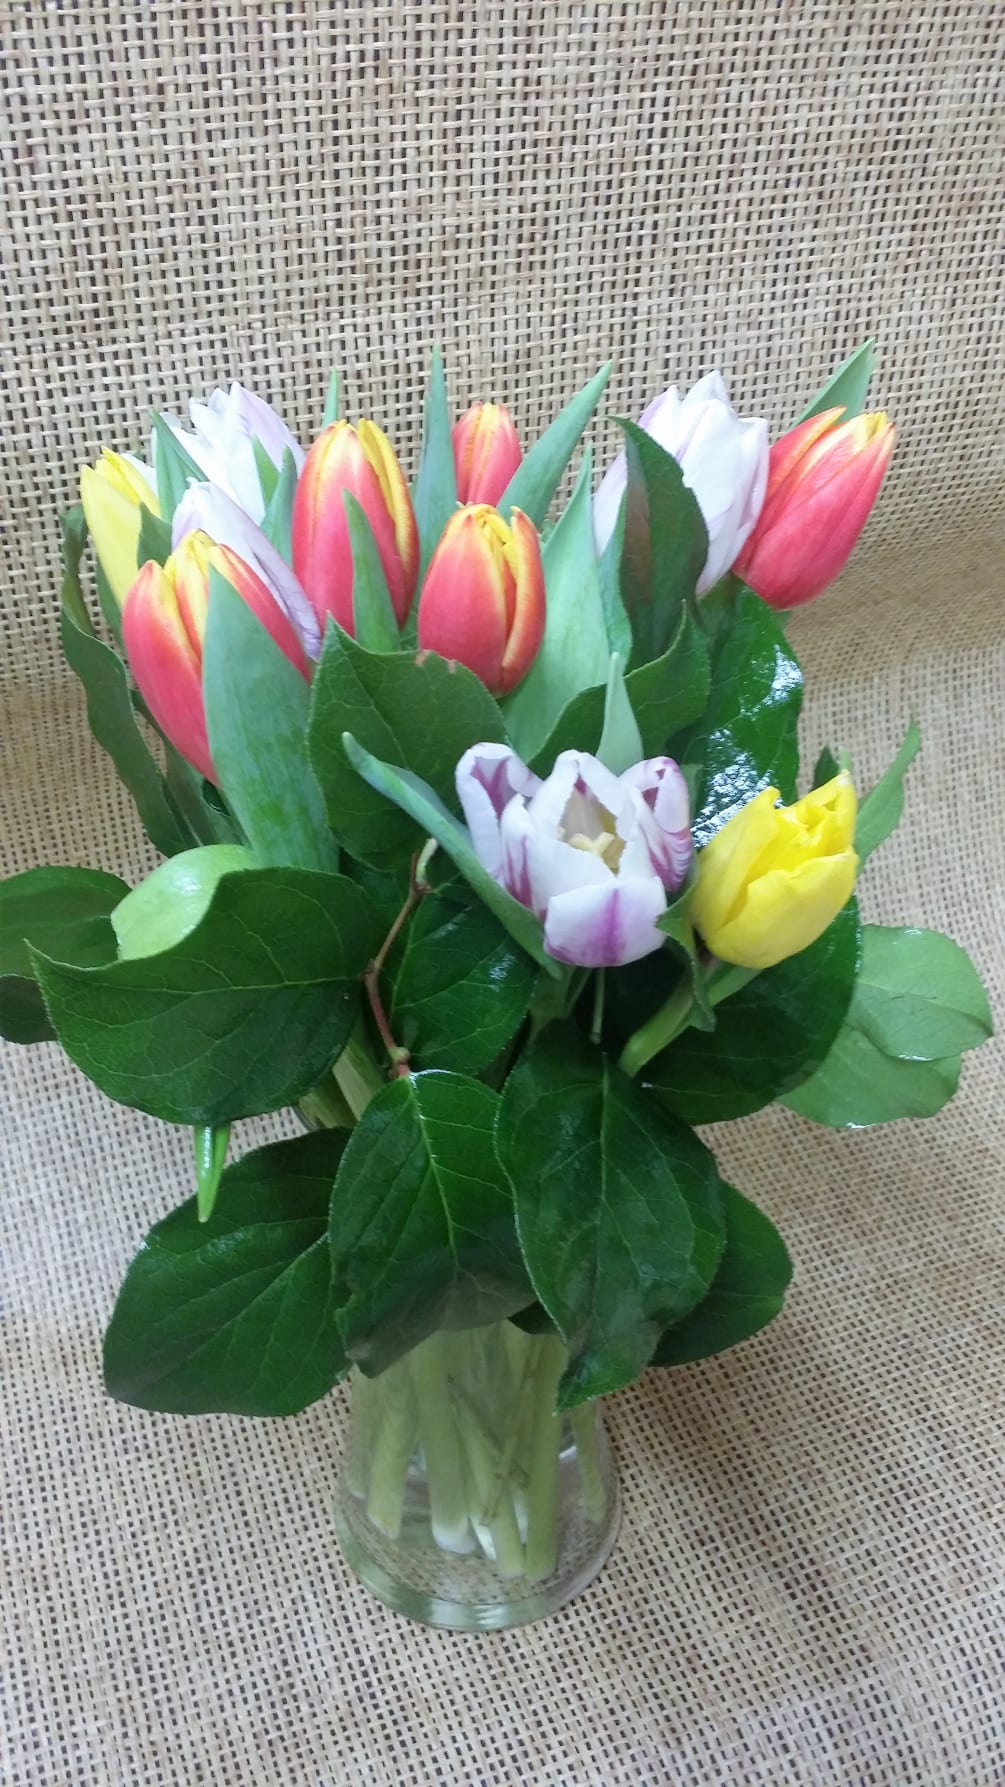 Arrangement of solid or mixed tulips welcome the new season with bright